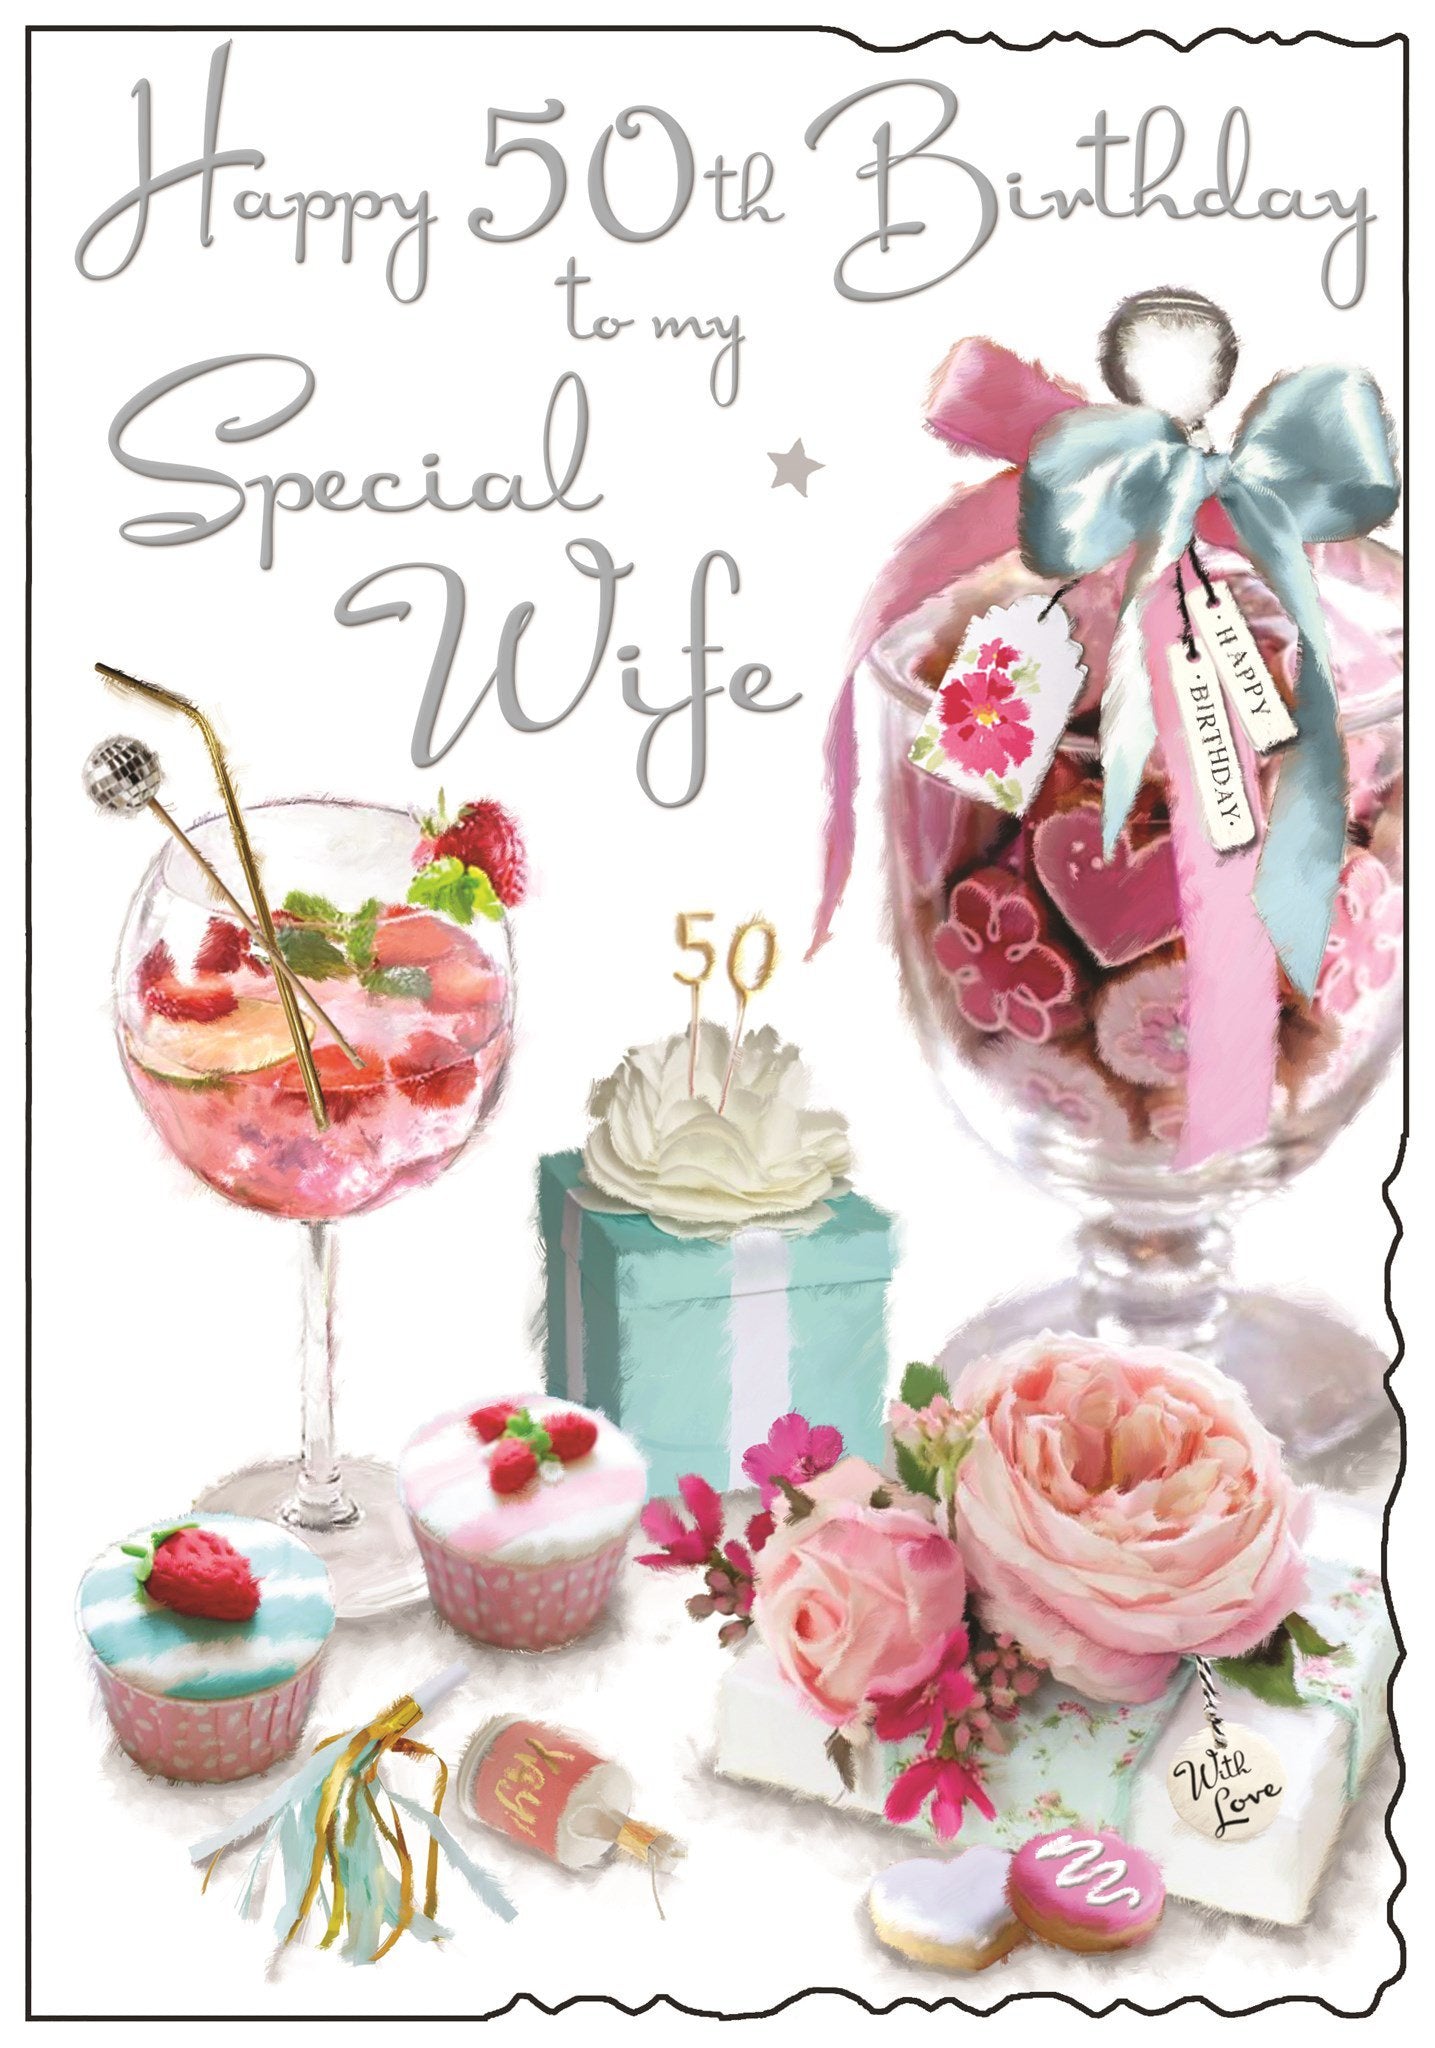 Front of Wife 50th Birthday Cakes Greetings Card